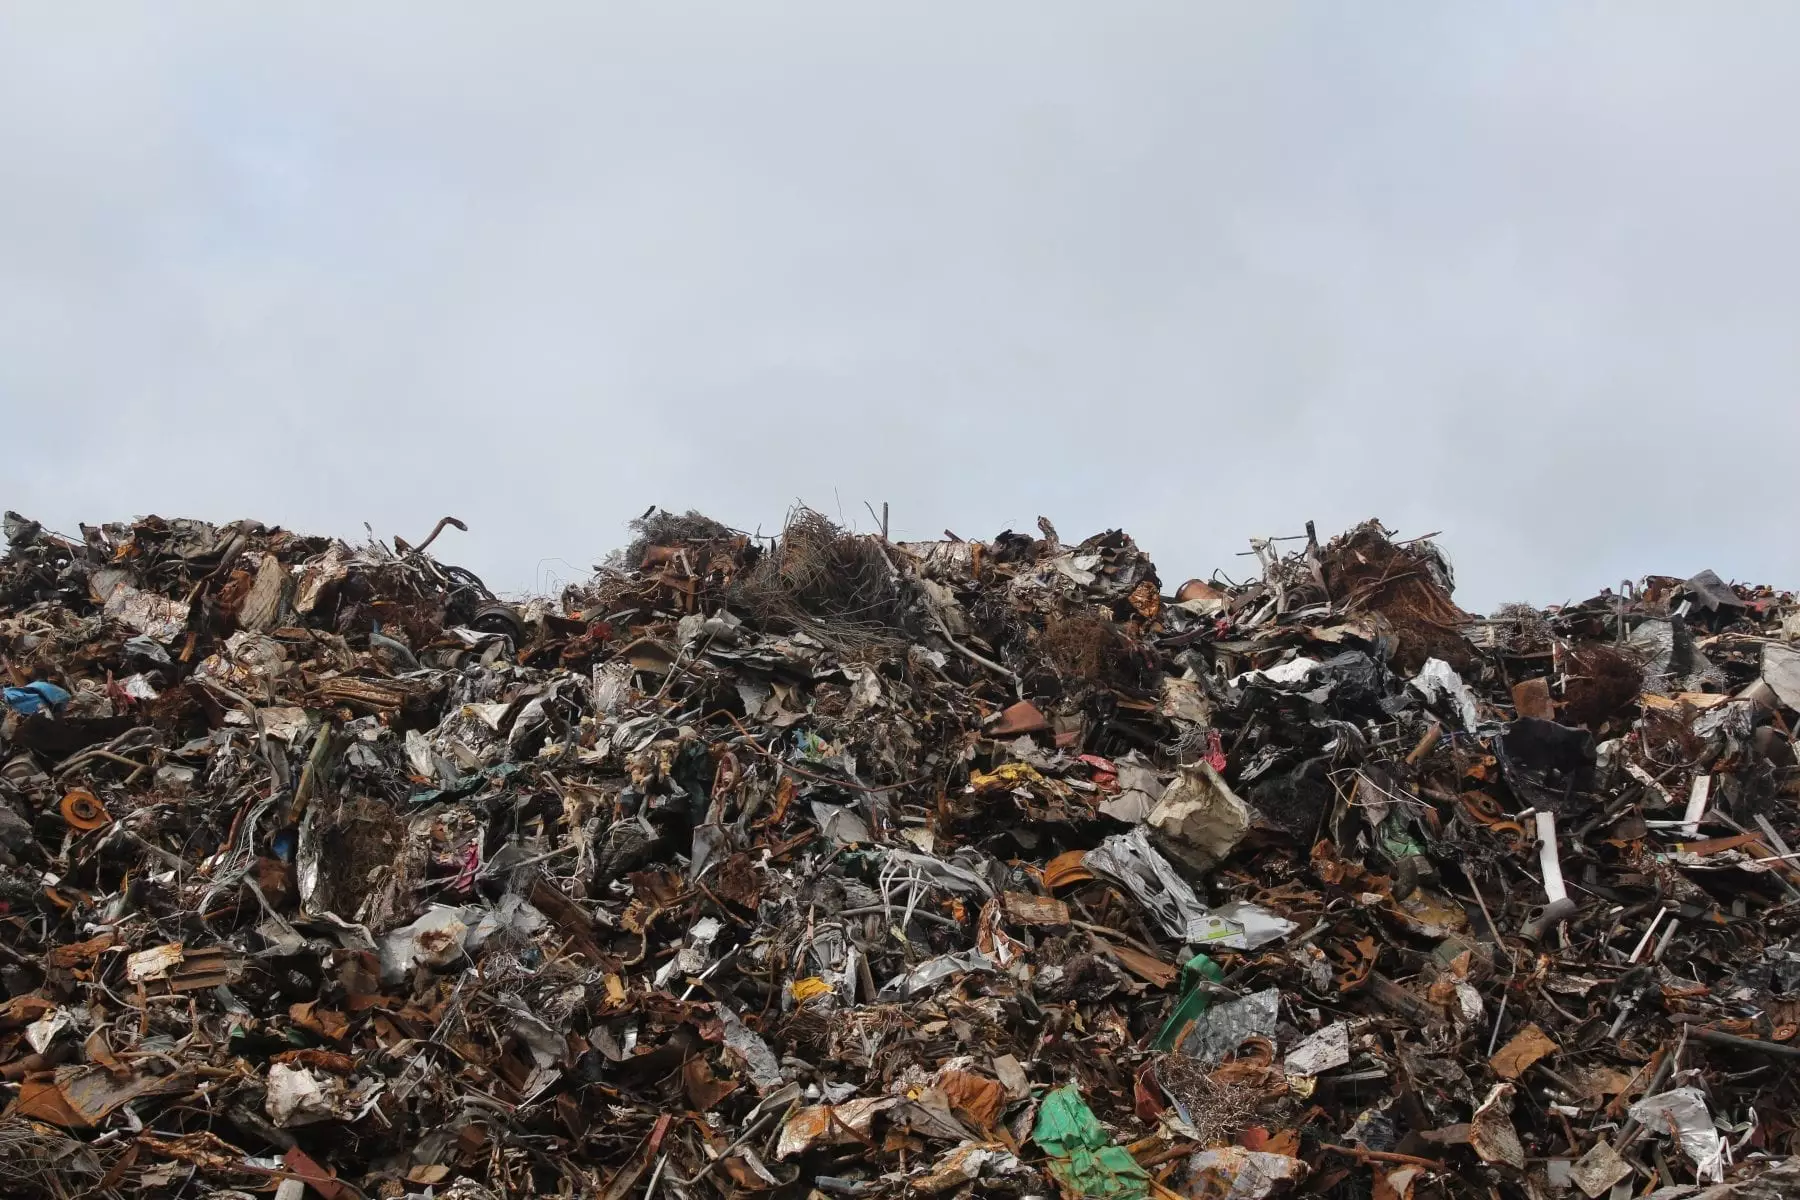 Pile of rubbish at a landfill site